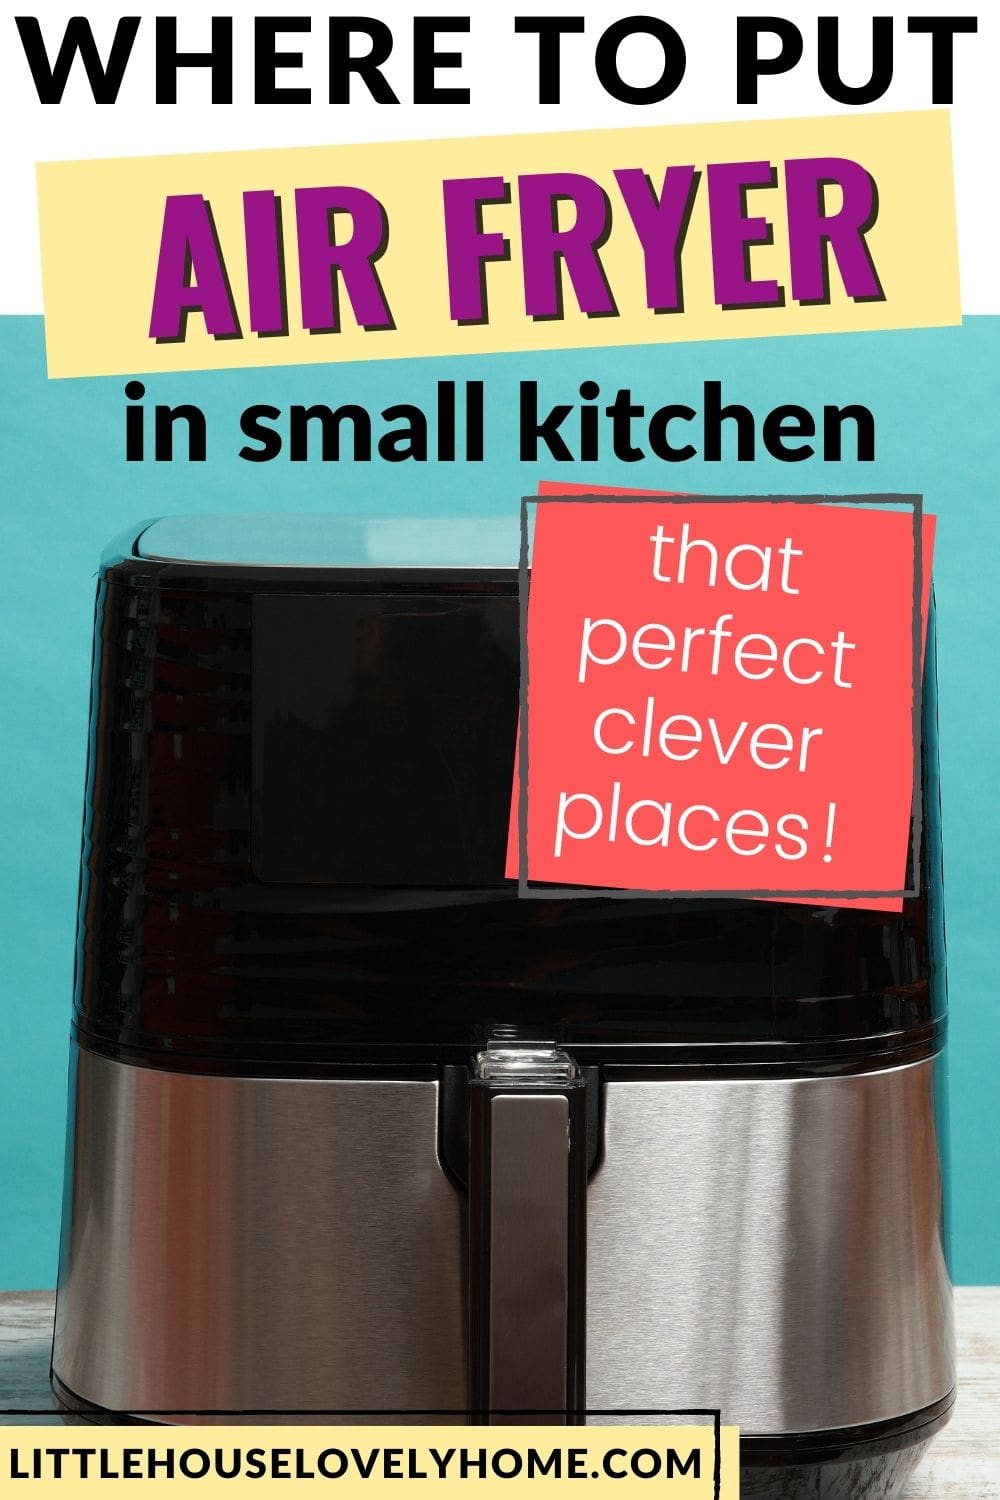 Picture of air fryer with text overlay that reads Where to Put Air Fryer in Small Kitchen